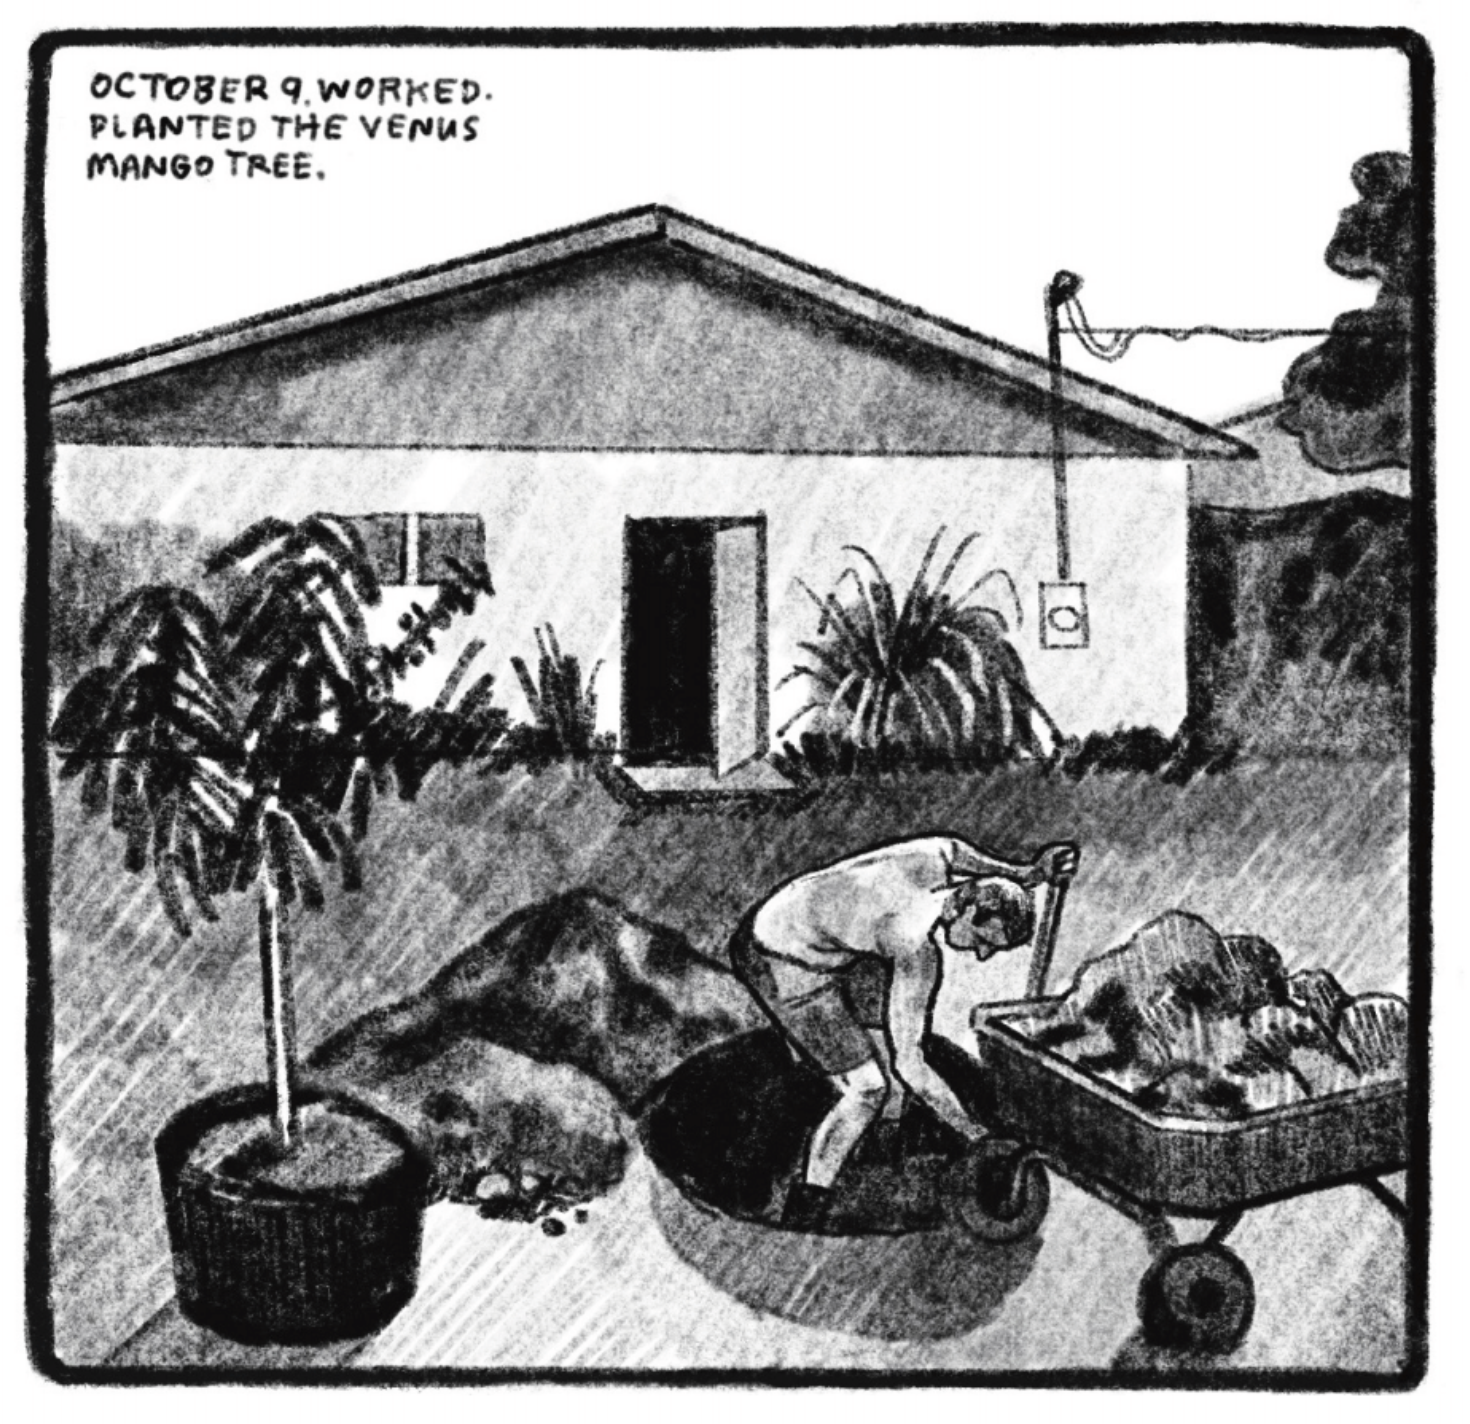 Tony is standing out his house in a large pot meant for a planted tree. He is shoveling soil from a wheel barrow into the pot. There is a pile of dirt behind him, and an already potted tree off to his side. â€œOctober 9. Worked. Planted the Venus mango tree.â€